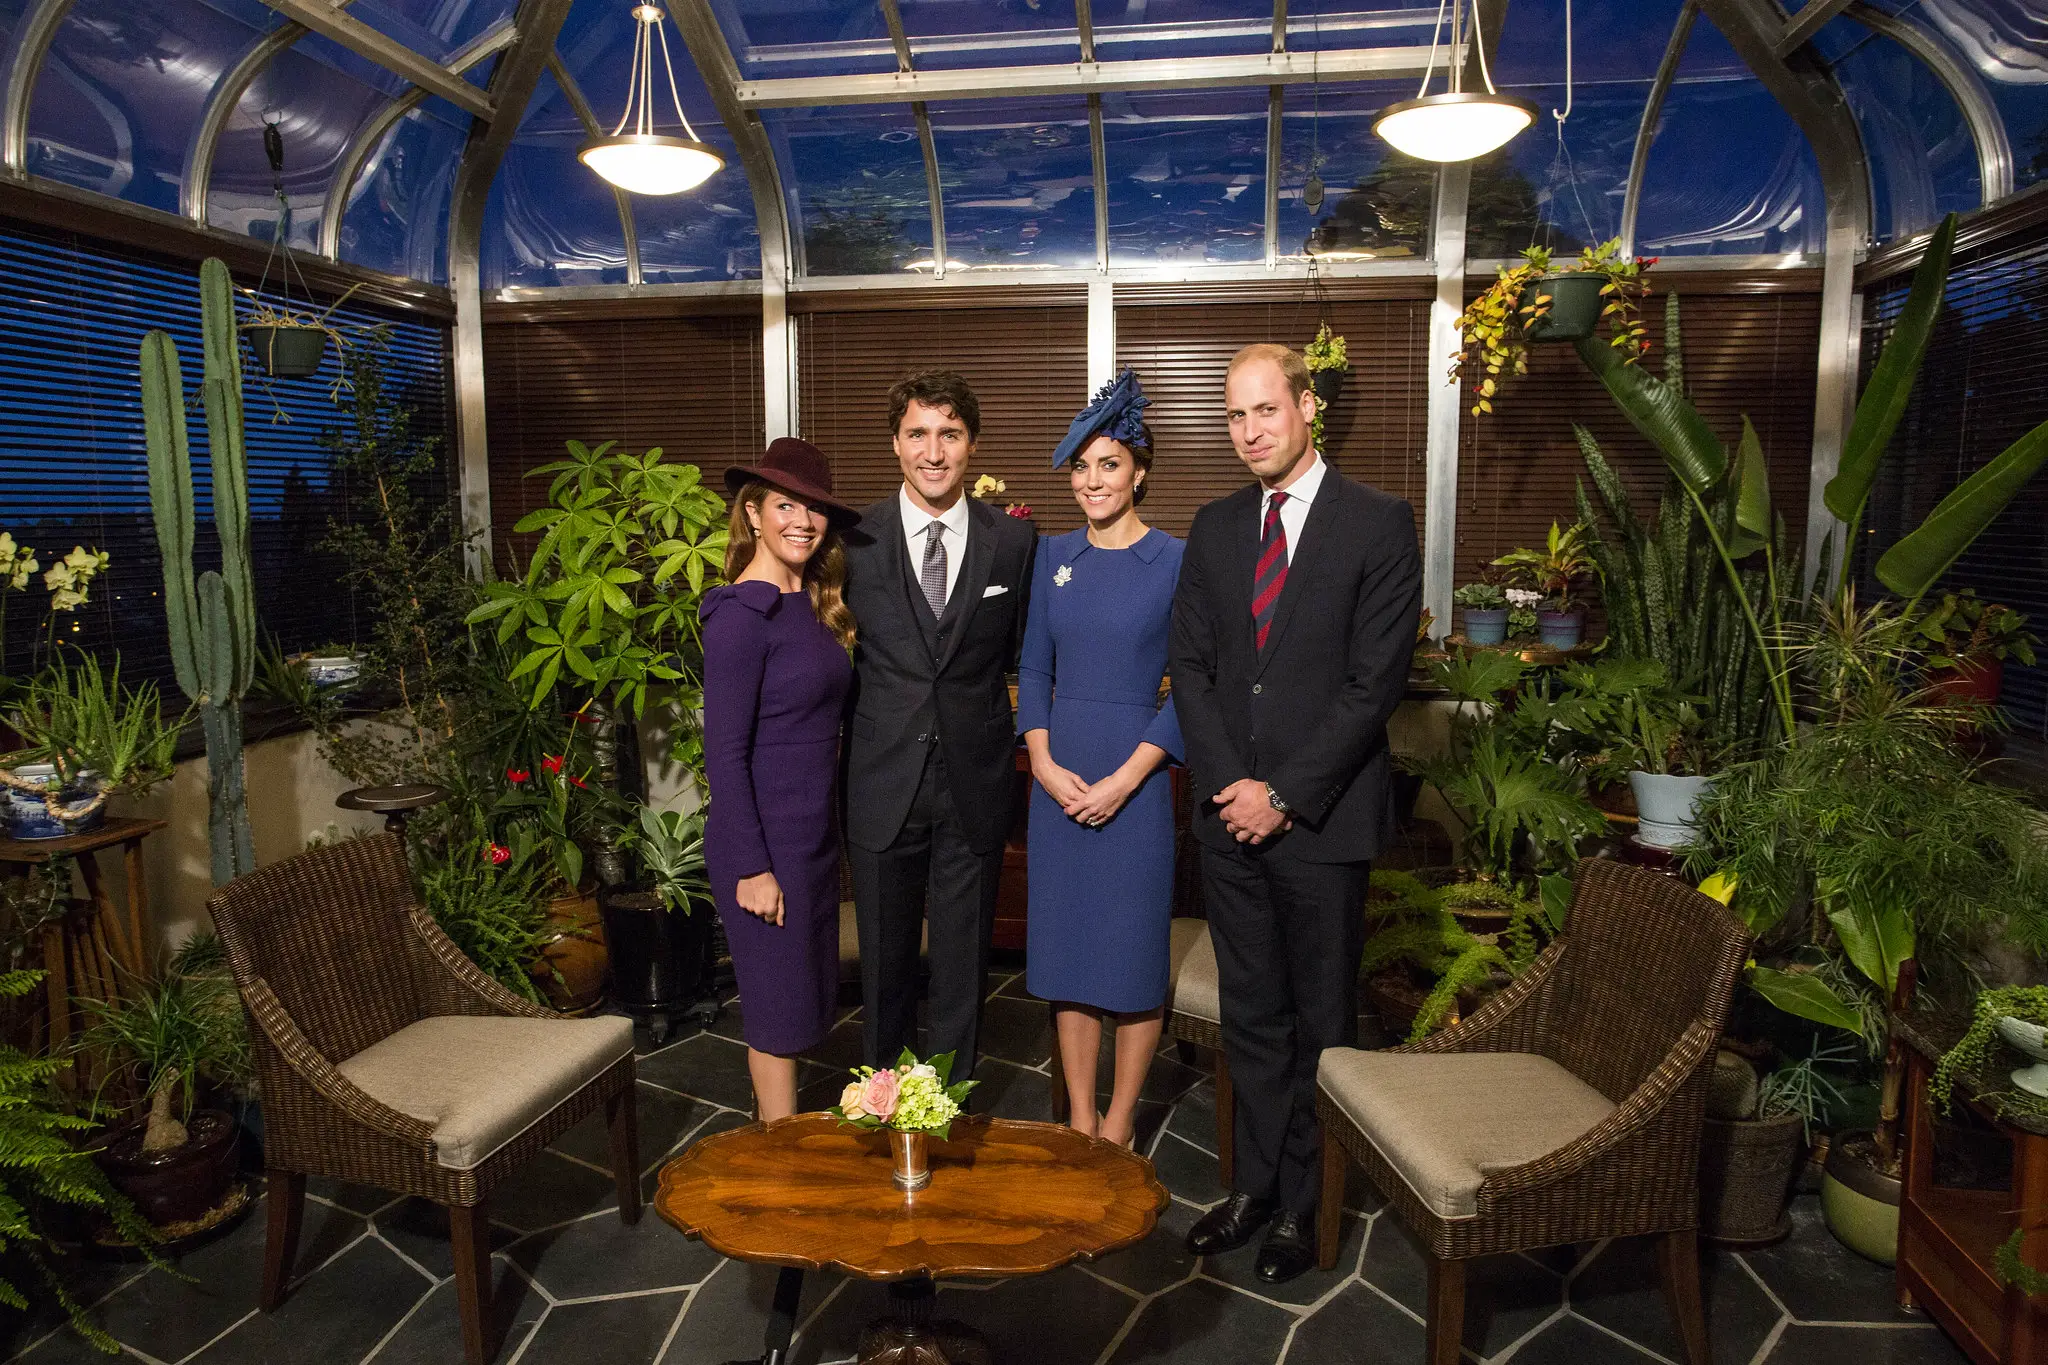 The Duke and Duchess of Cambridge held meeting with Canadian Governor General and Prime Minister at Victoria house